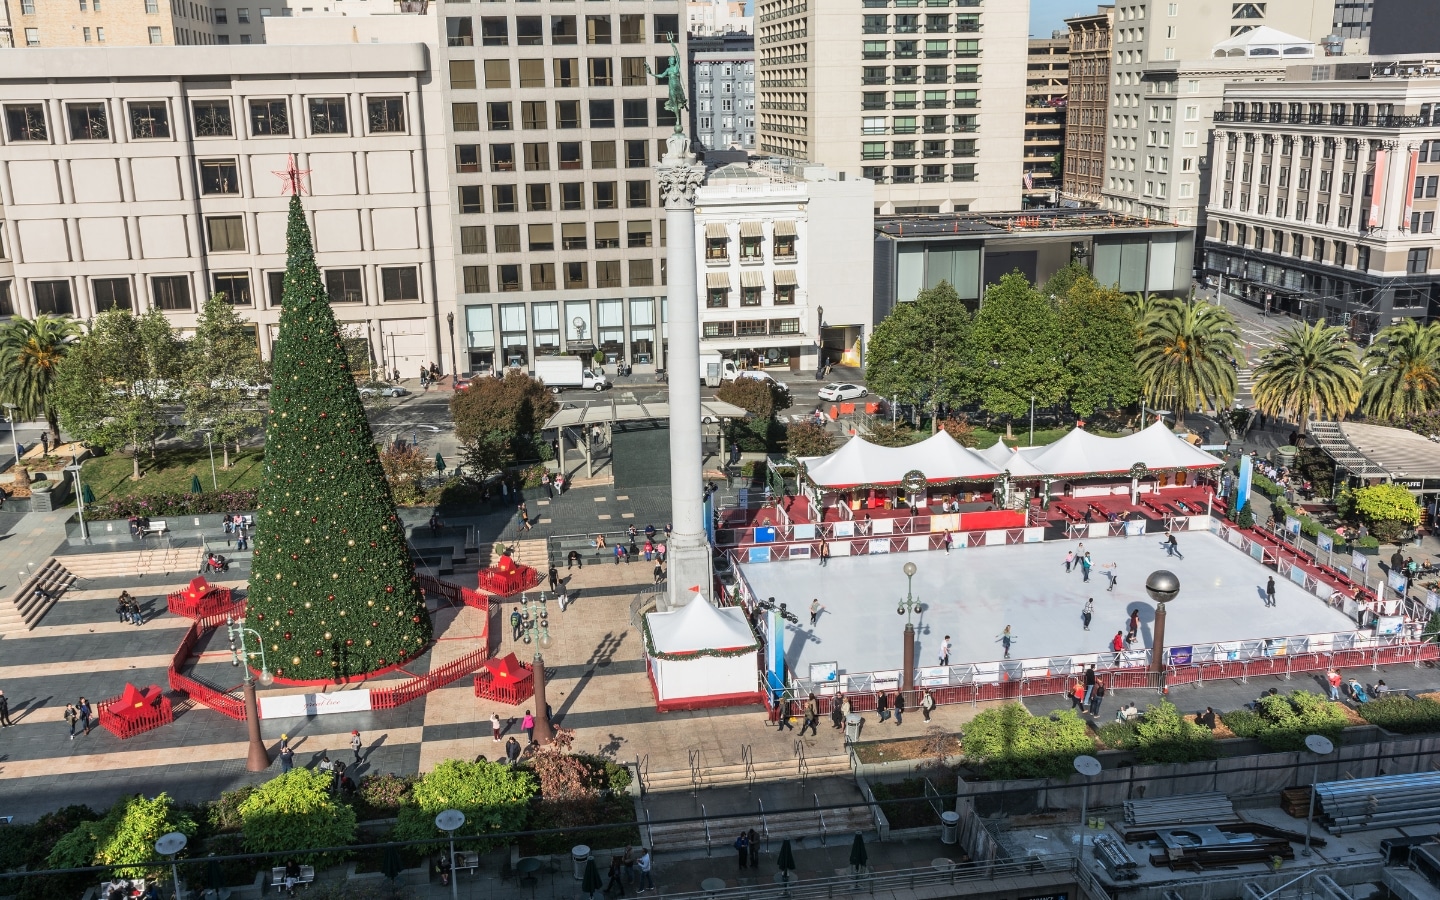 Holiday Ice Rink In Union Square